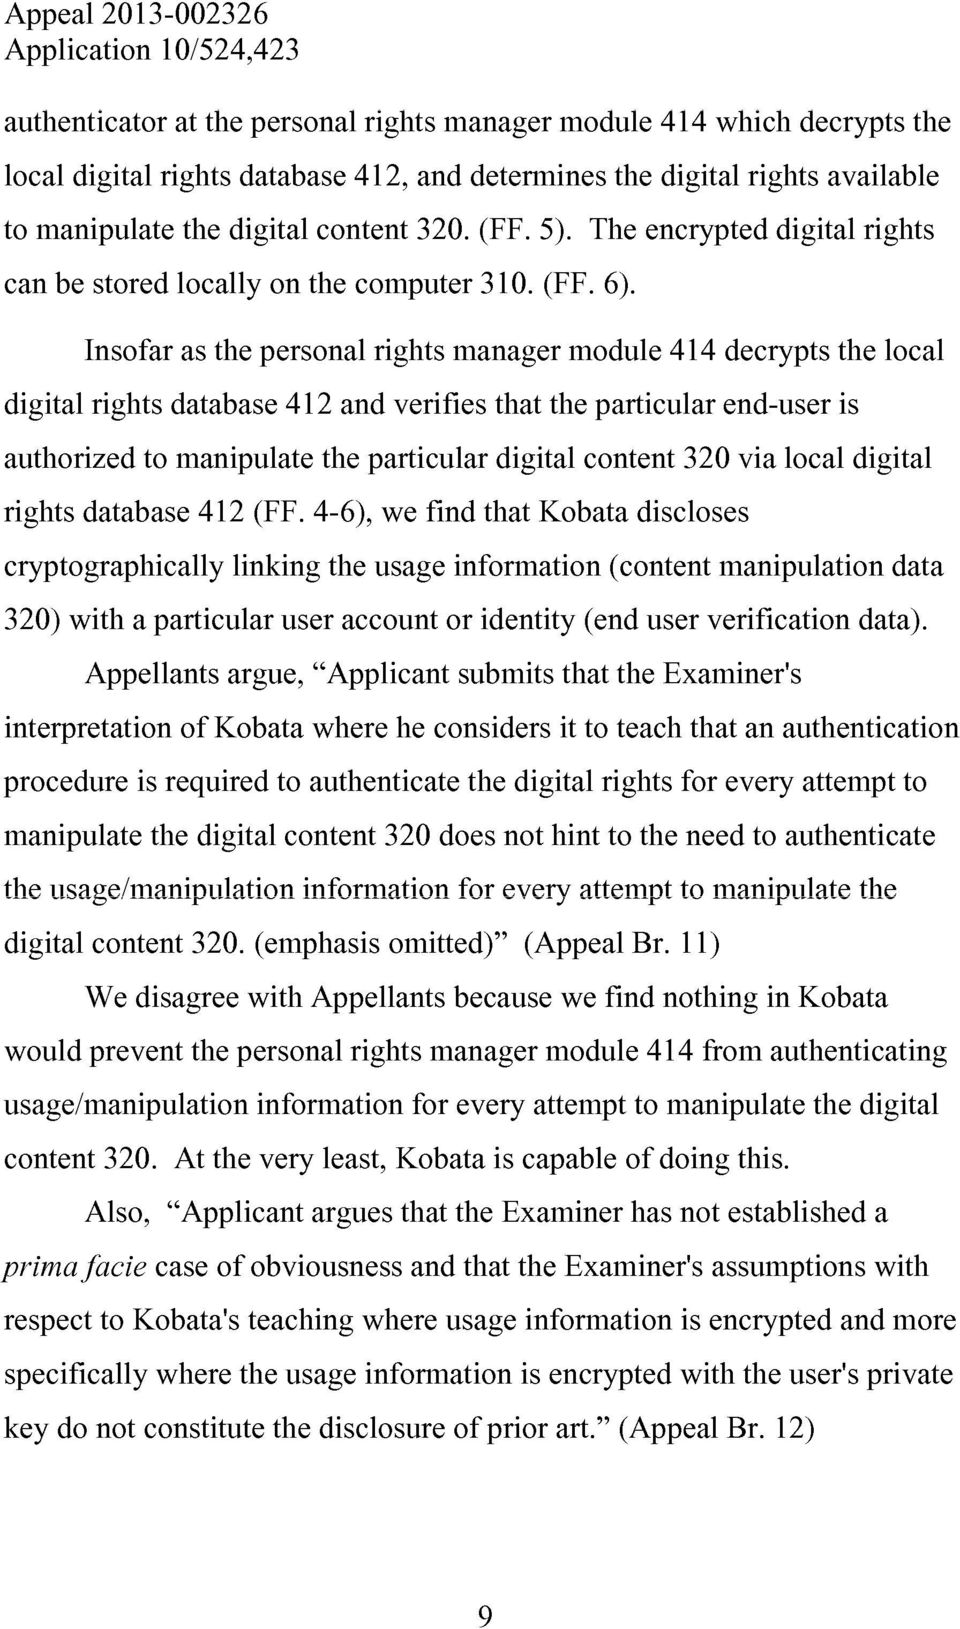 Insofar as the personal rights manager module 414 decrypts the local digital rights database 412 and verifies that the particular end-user is authorized to manipulate the particular digital content